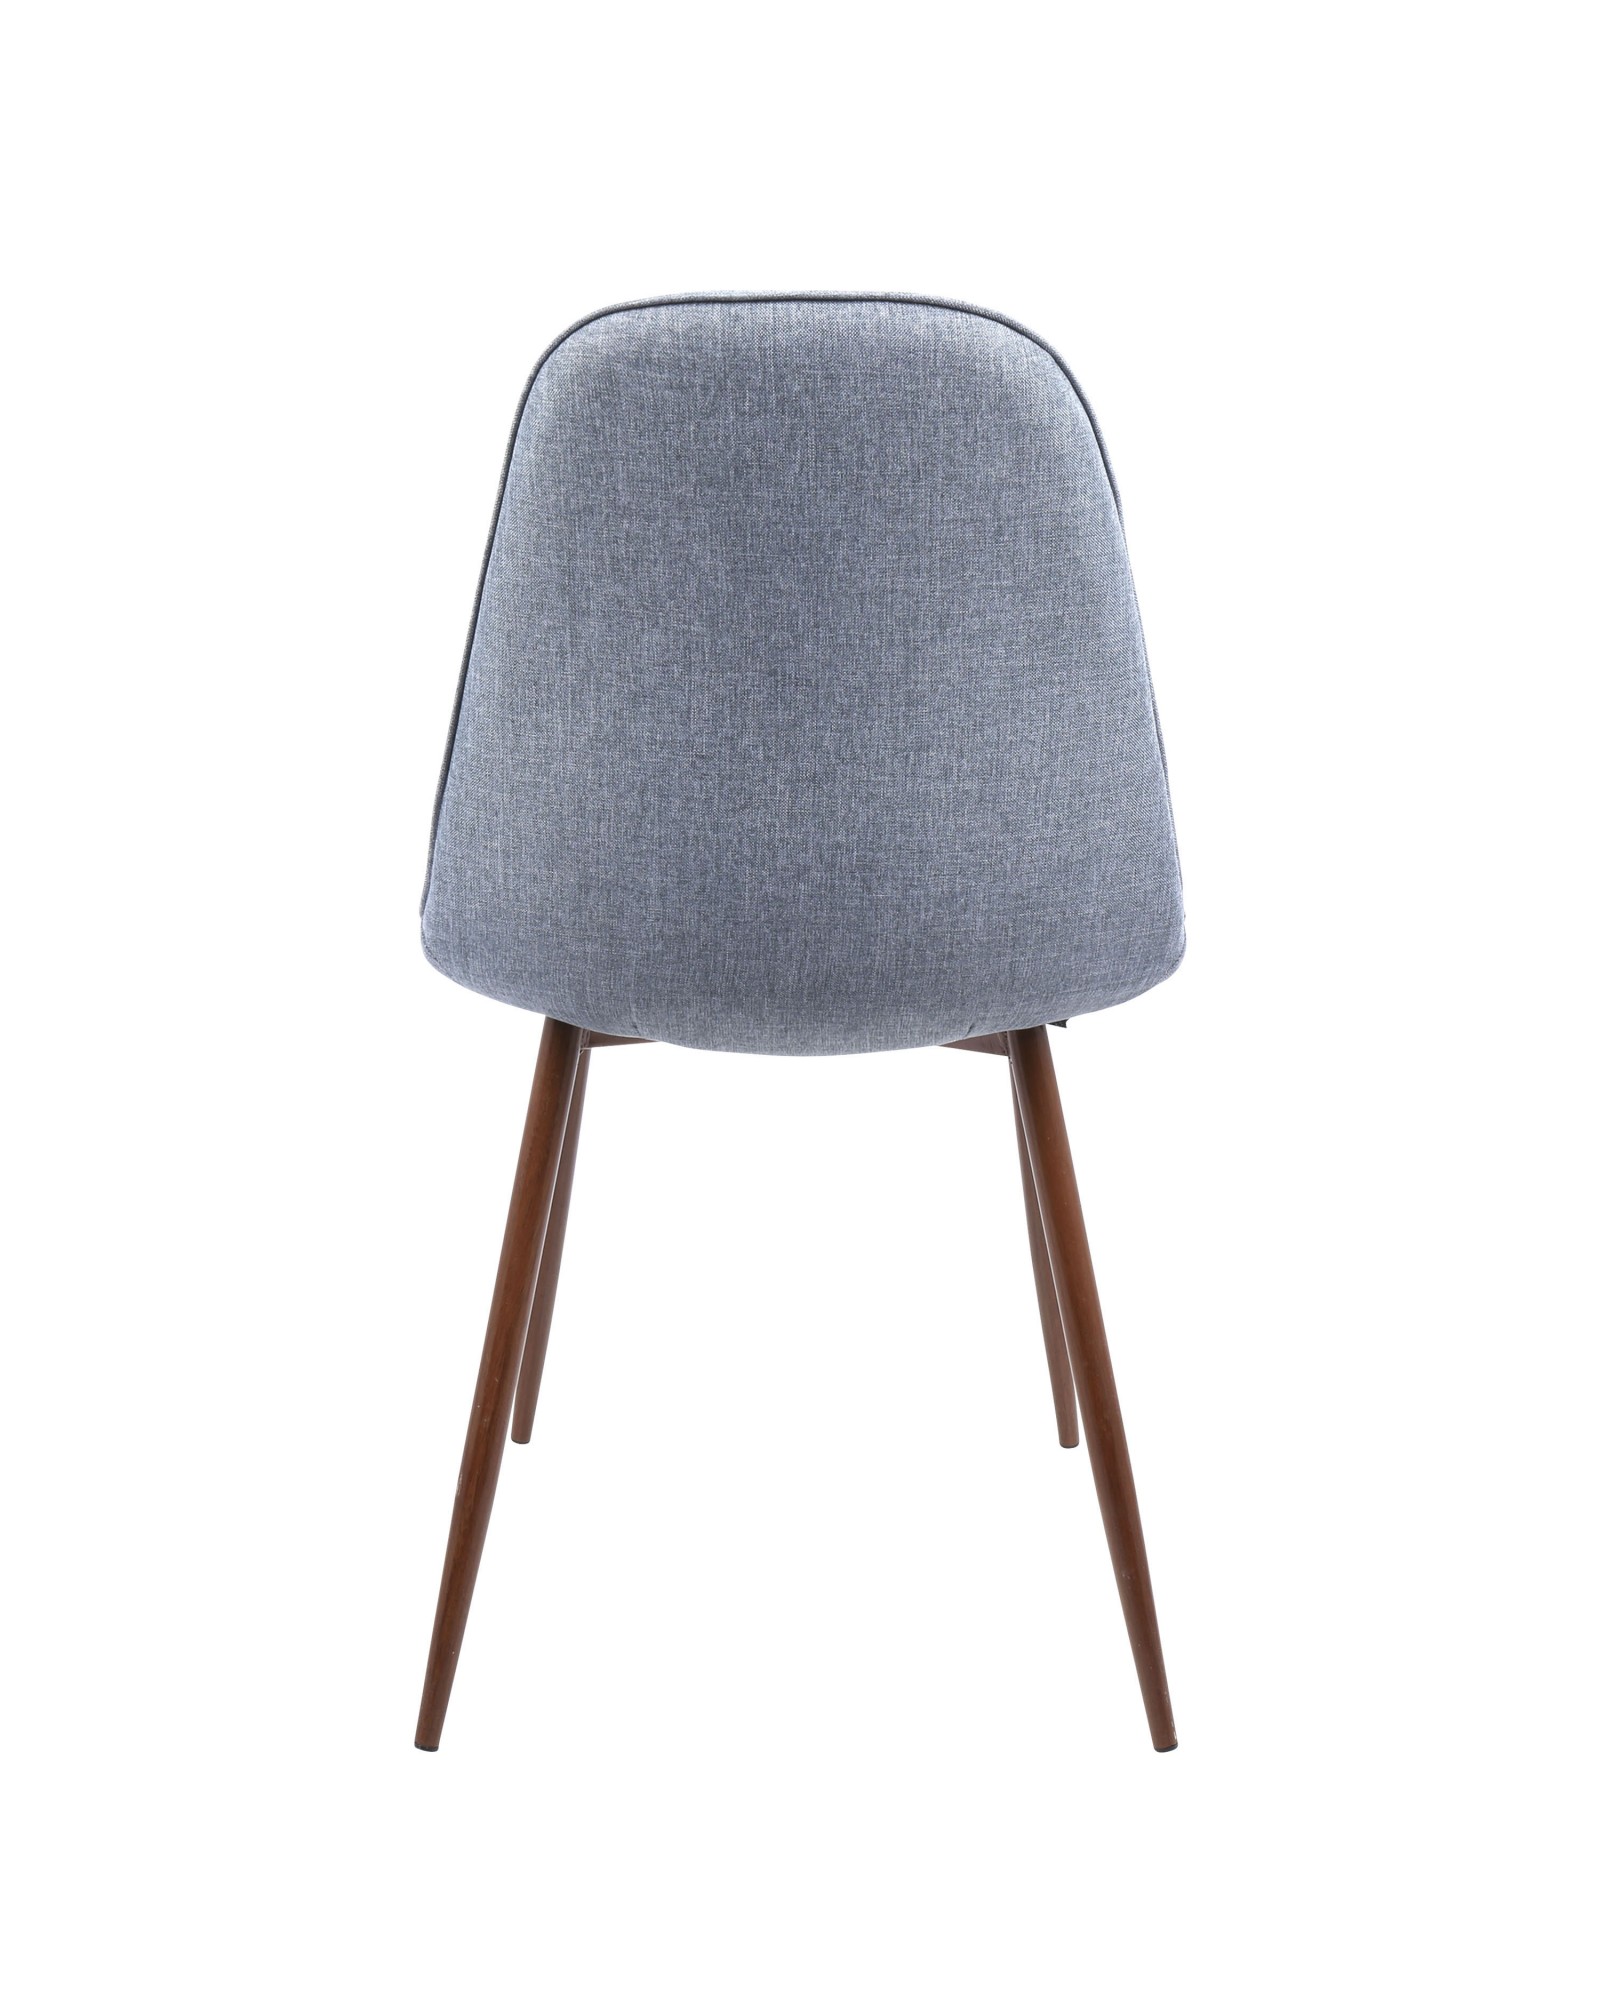 Pebble Mid-Century Modern Dining/Accent Chair in Walnut and Blue Fabric - Set of 2